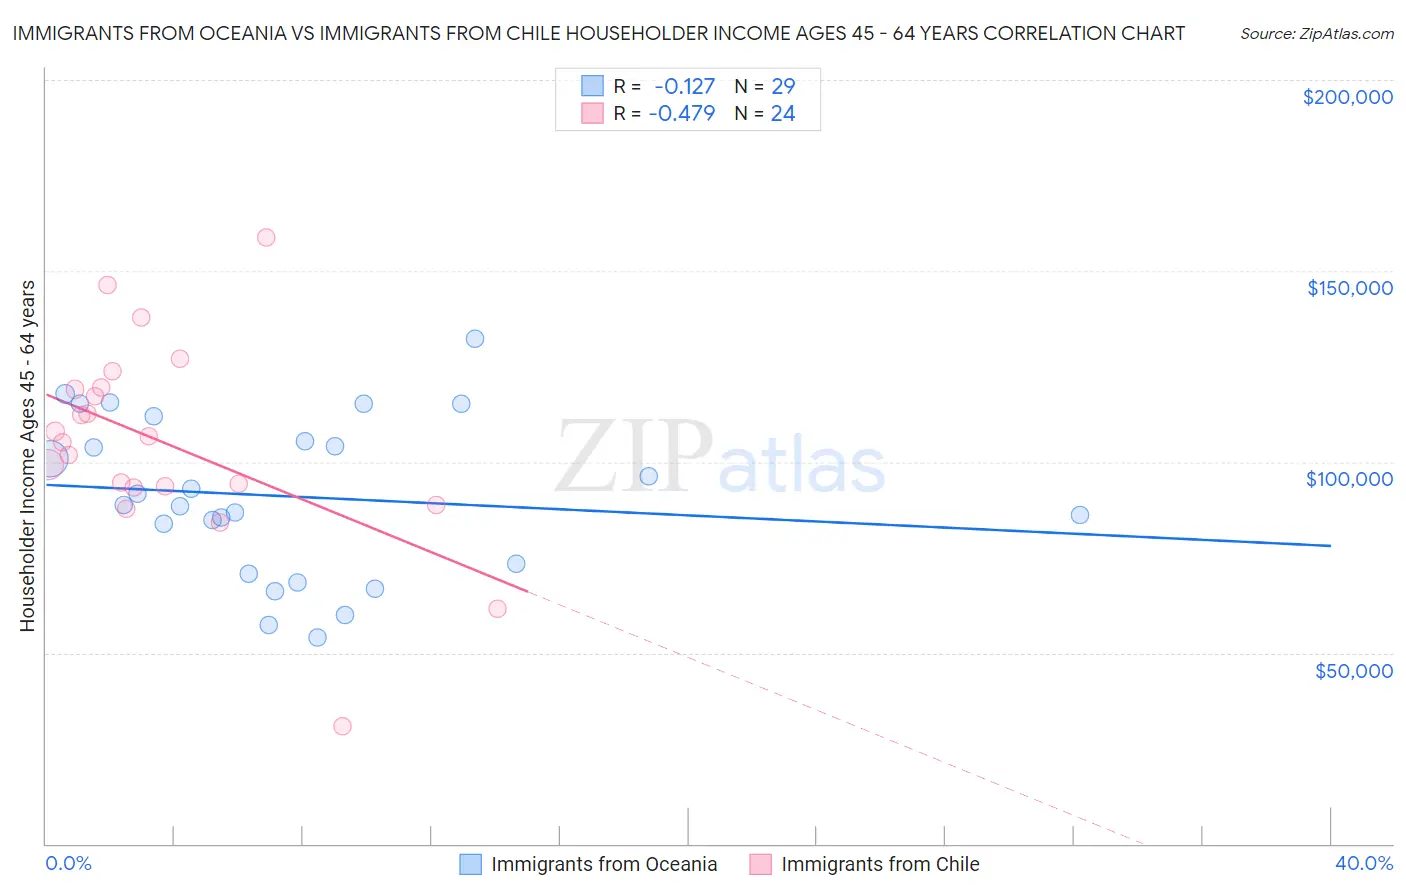 Immigrants from Oceania vs Immigrants from Chile Householder Income Ages 45 - 64 years